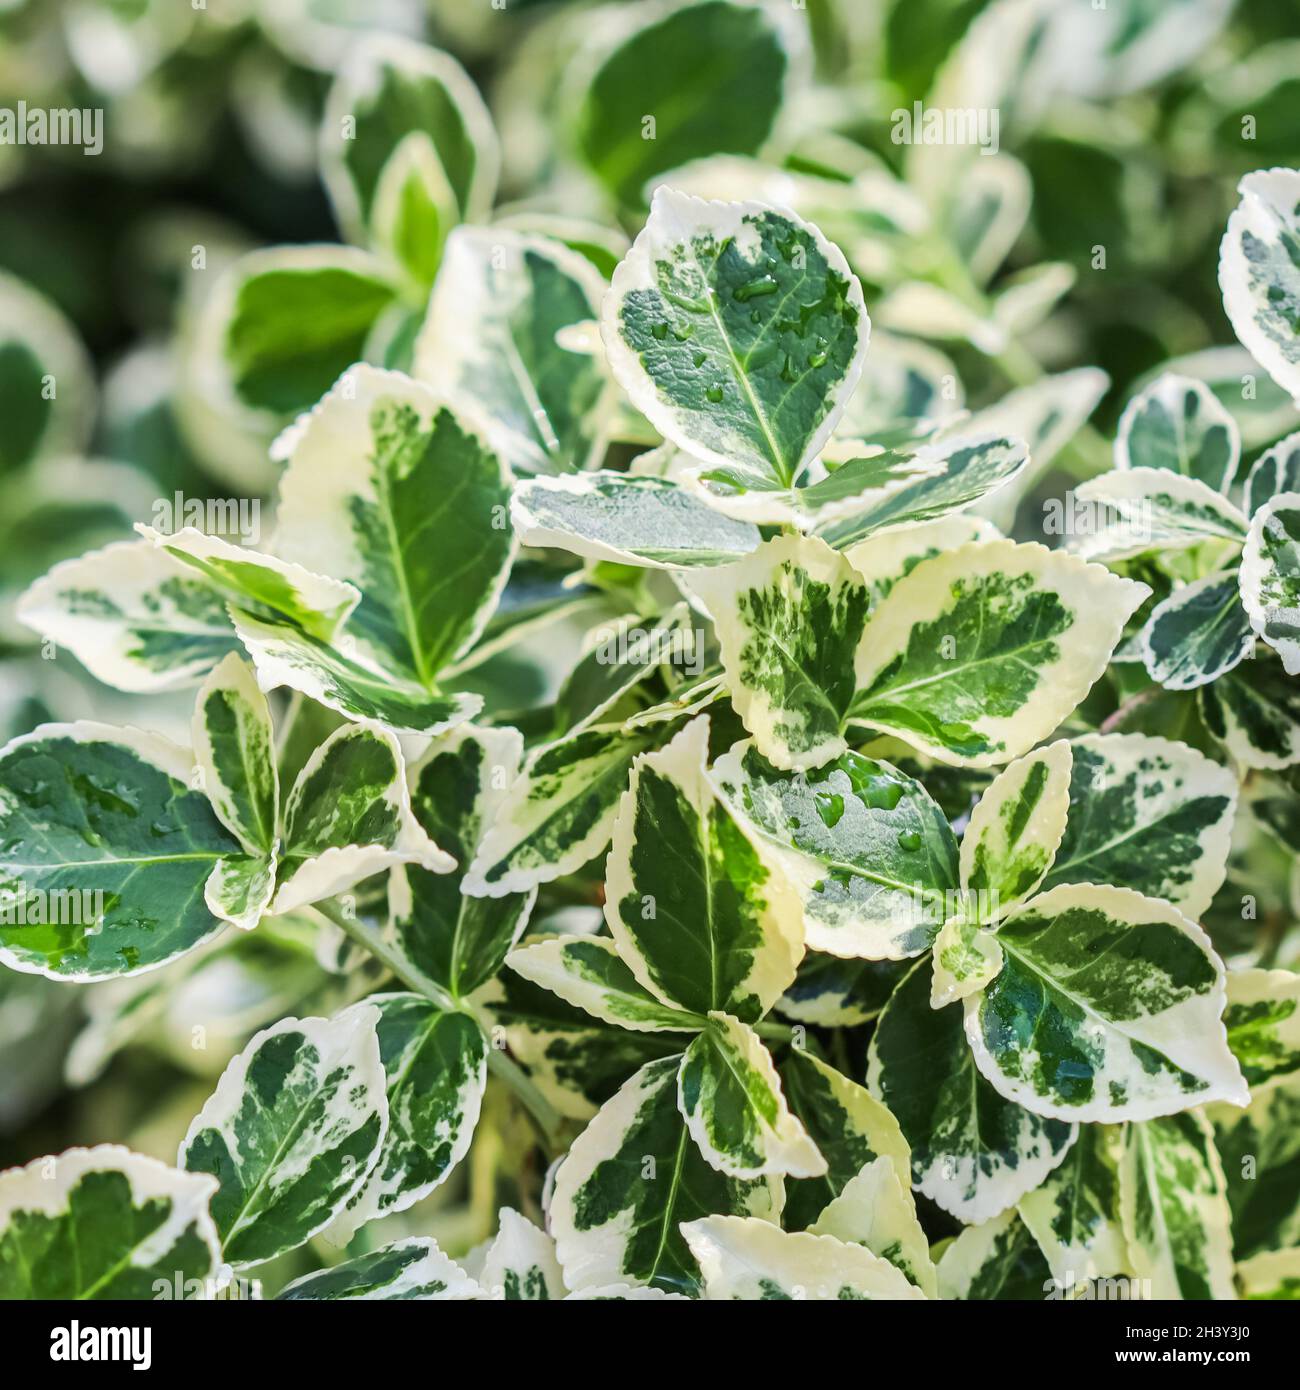 Texture, background, pattern of green and white leaves of Euonymus fortunei Emerald Gaiety with rain drops Stock Photo